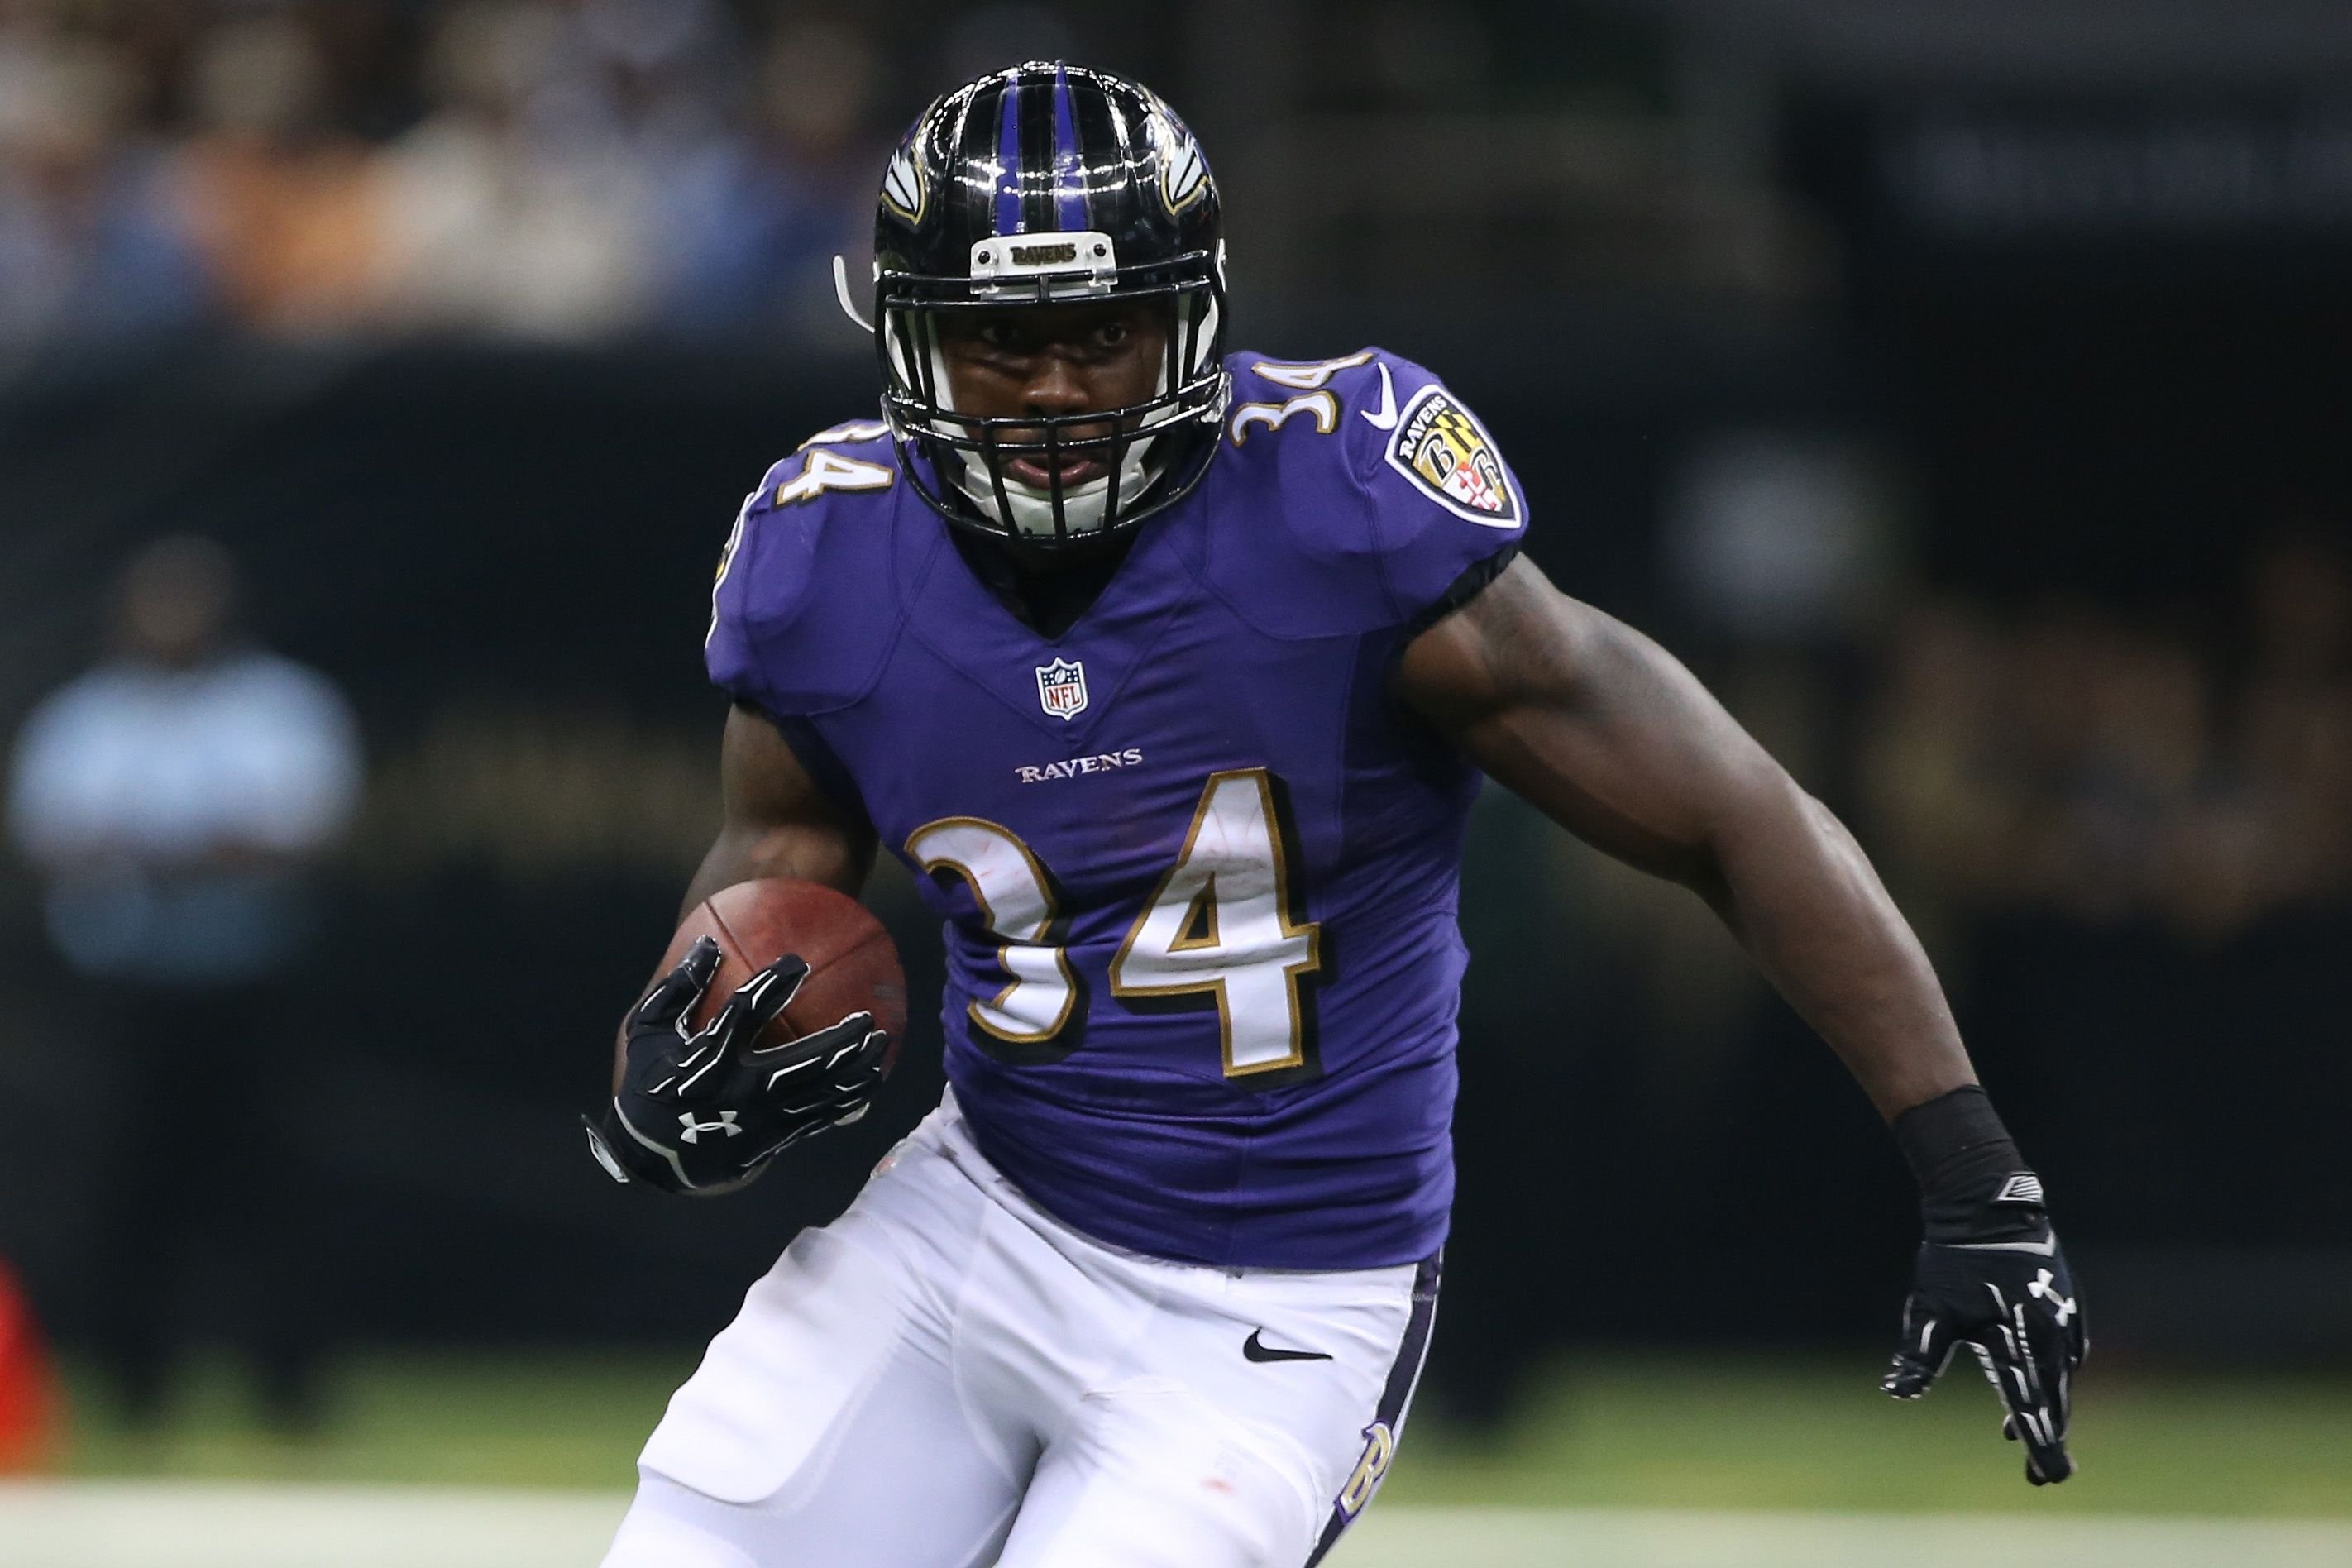 Lorenzo Taliaferro of the Baltimore Ravens playing against the New Orleans Saints on August 28, 2014, in New Orleans, Louisiana | Photo: Chris Graythen/Getty Images